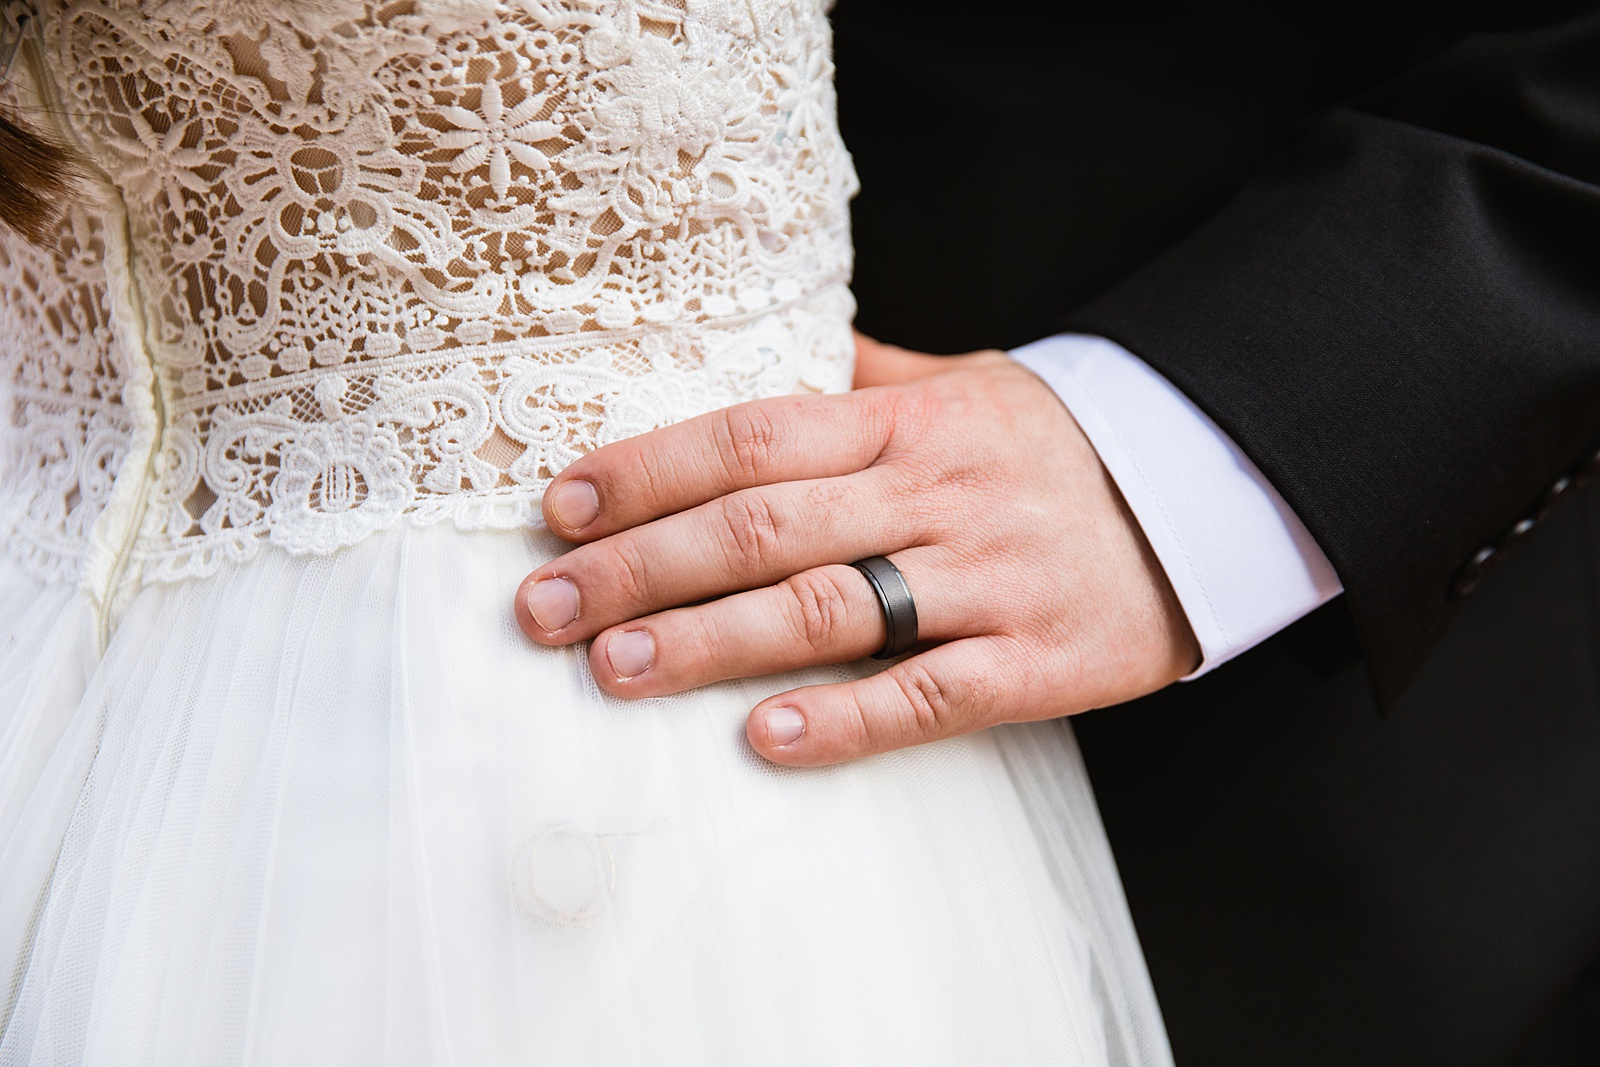 Detail image of wedding rings by PMA Photography.